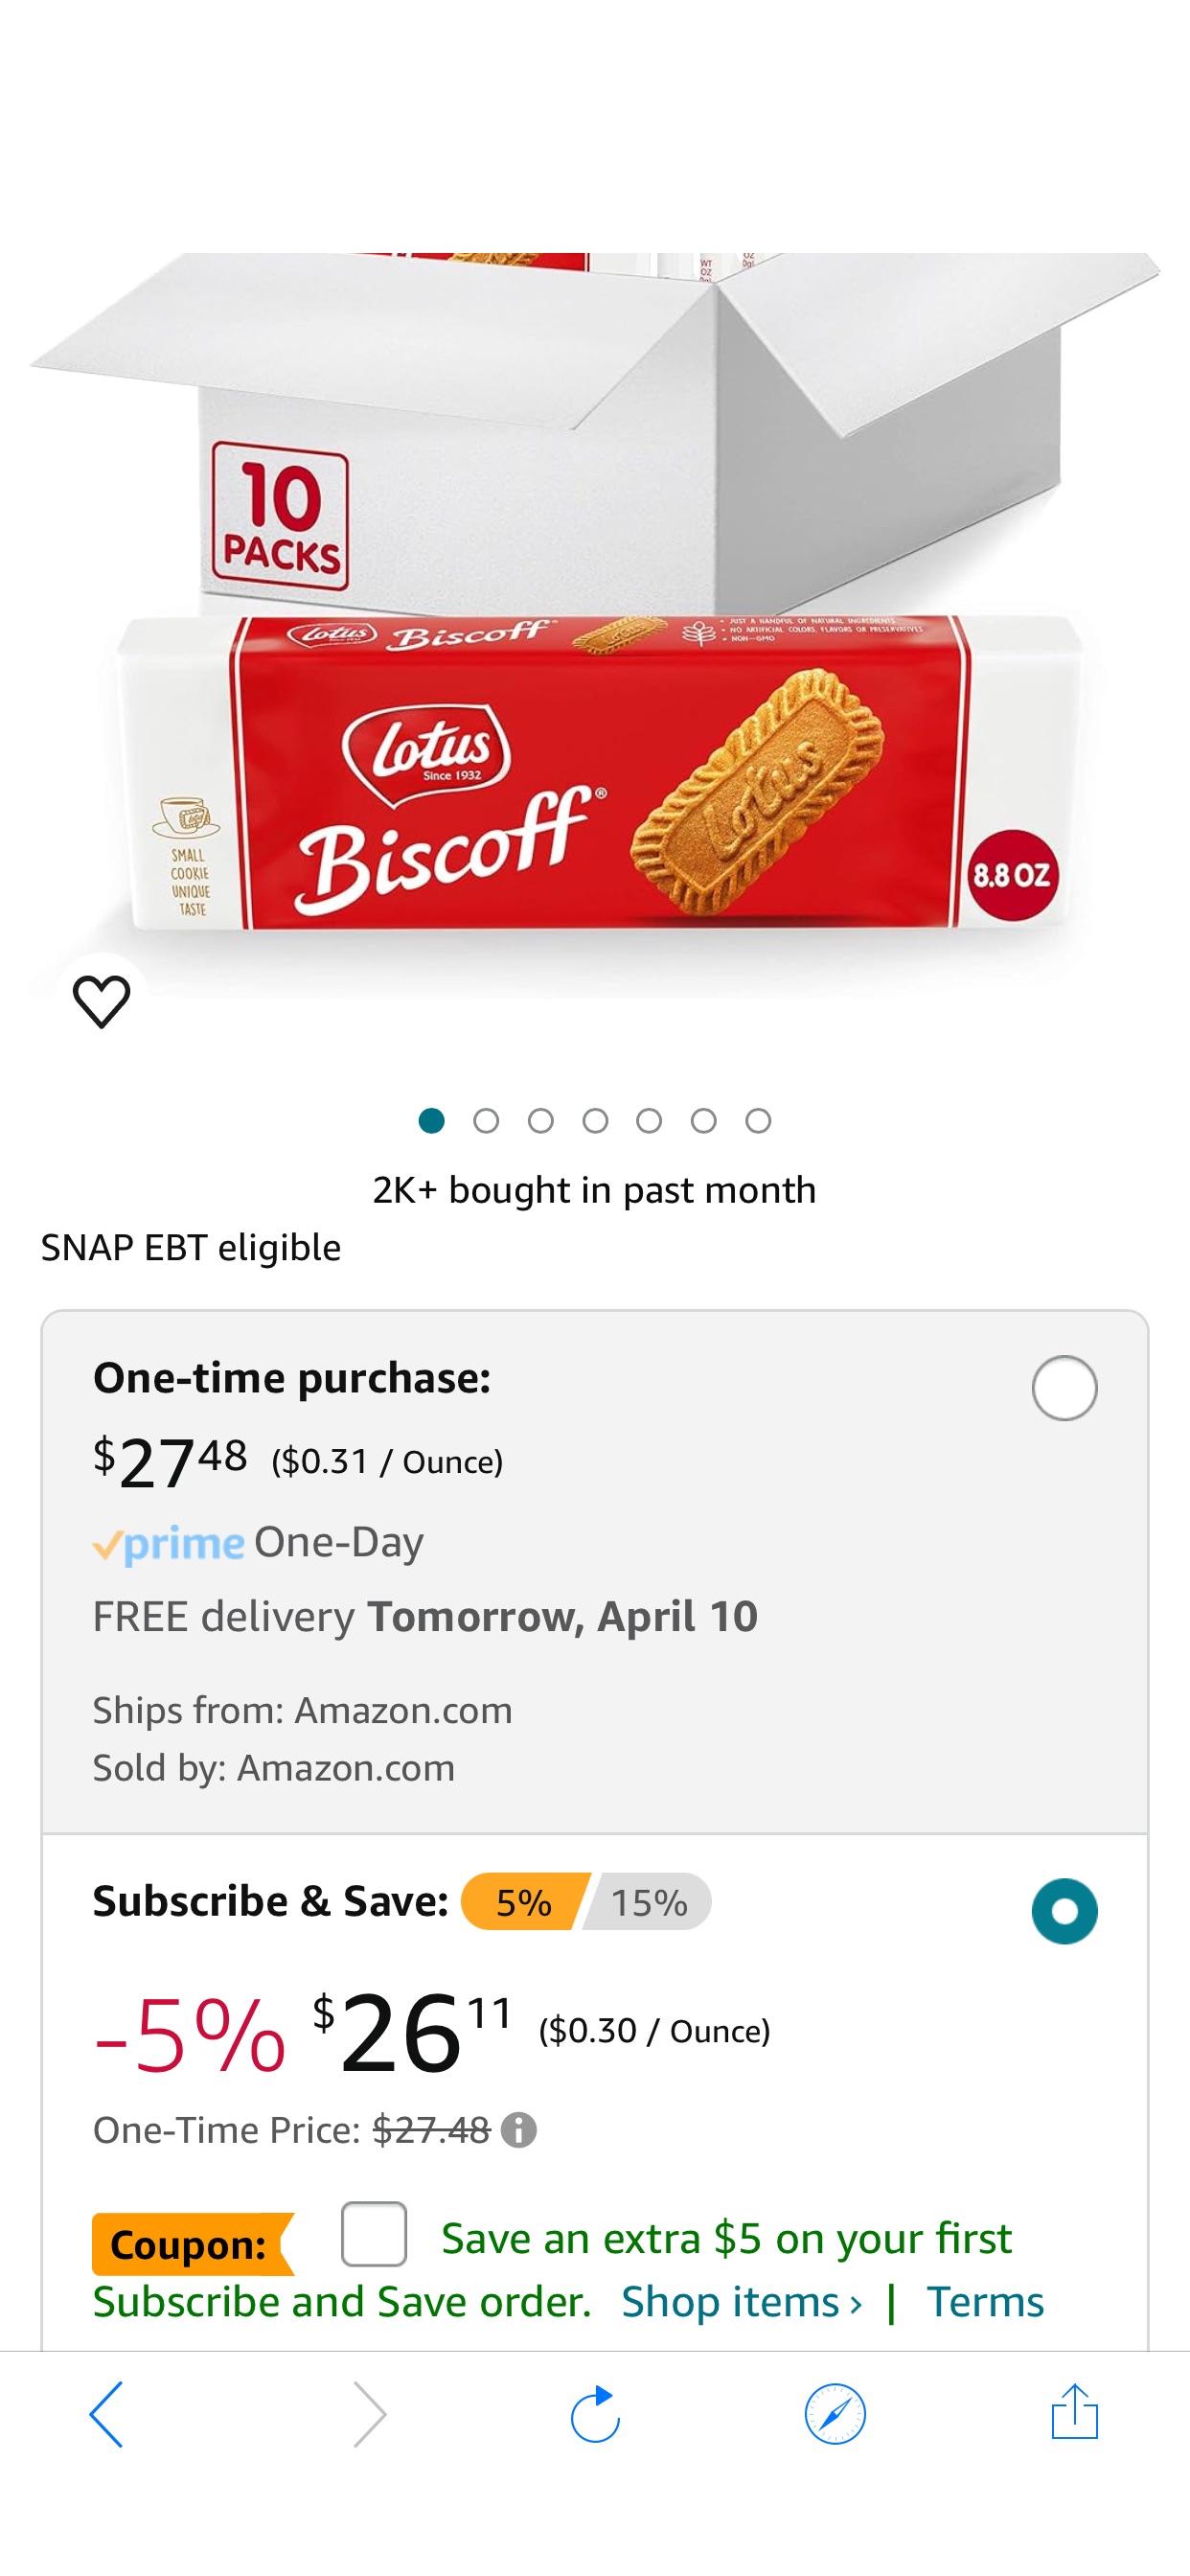 Amazon.com: Lotus Biscoff, Caramelized Biscuit Cookies, non GMO + Vegan - 8.8 Ounce (Pack of 10) : Grocery & Gourmet Food 焦糖饼干